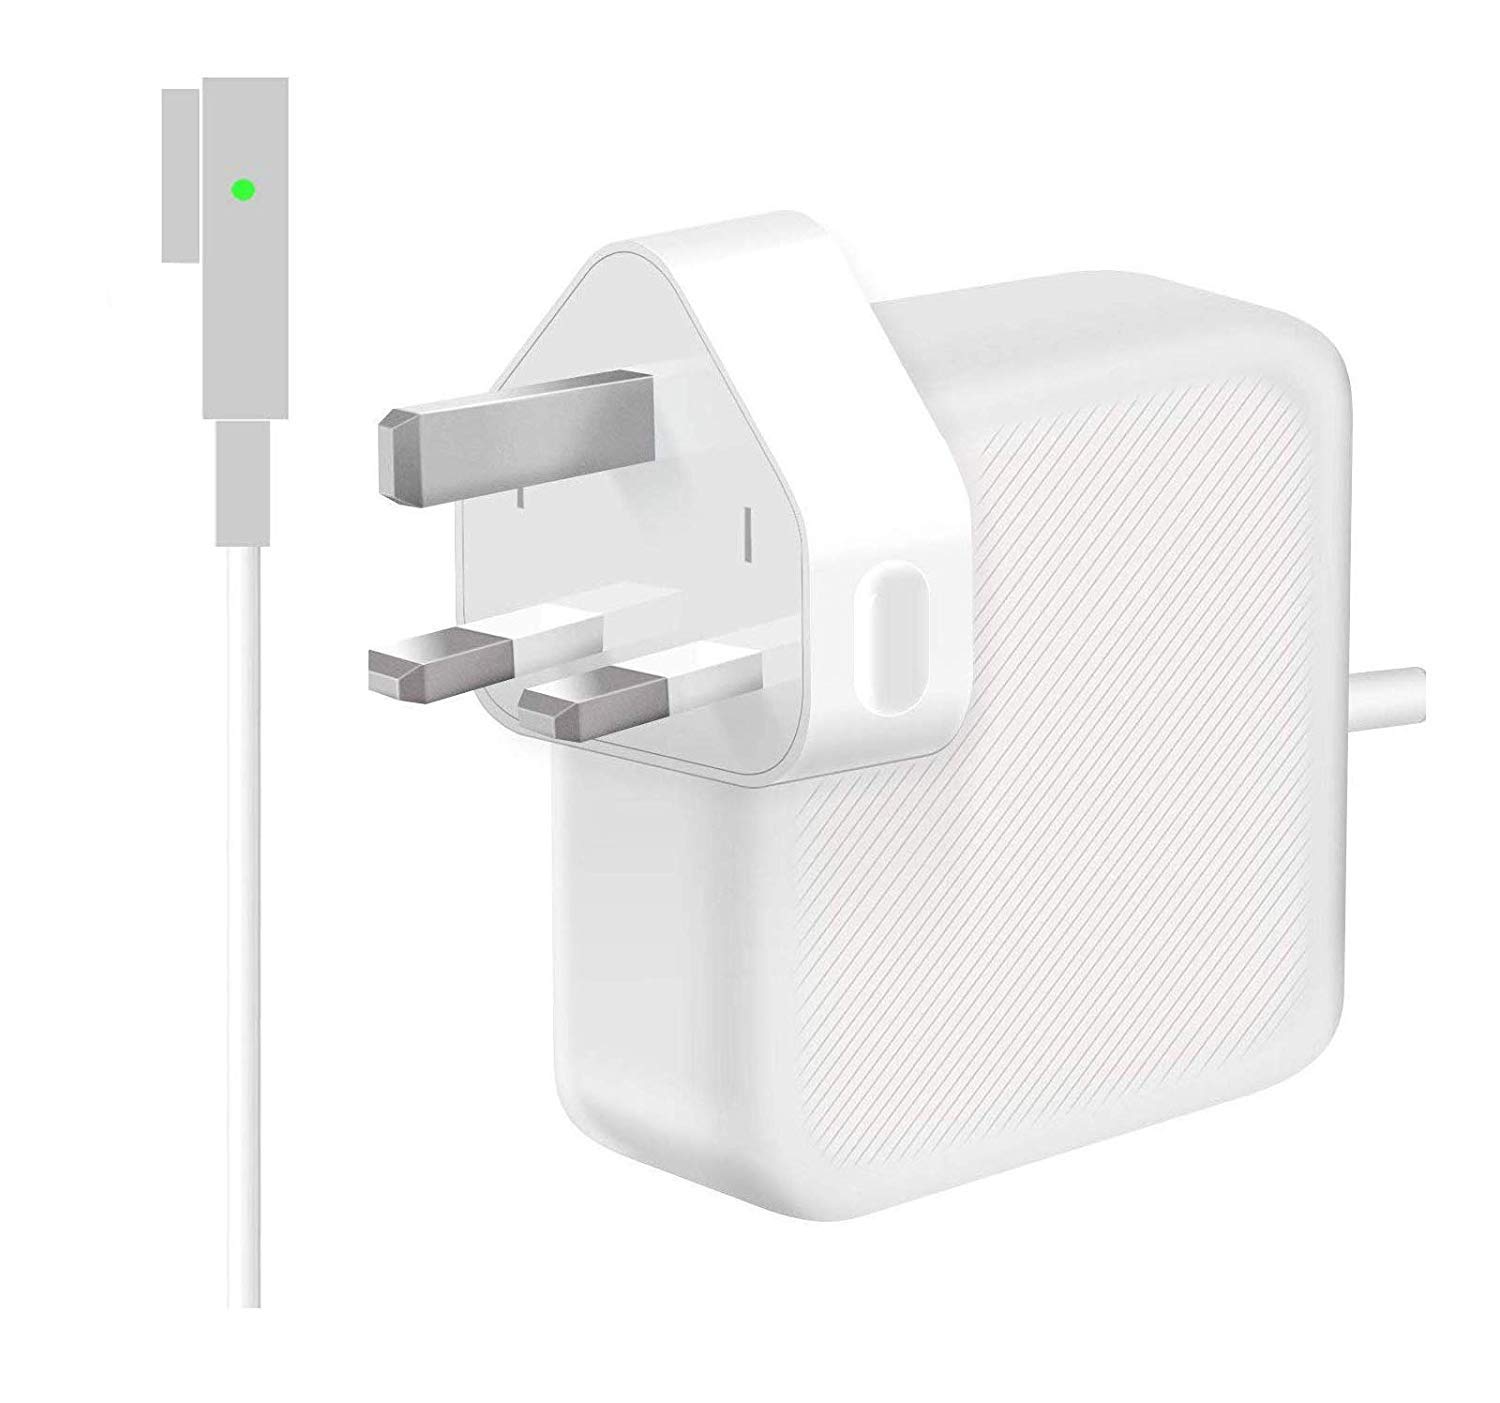 charger for 2010 mac book air